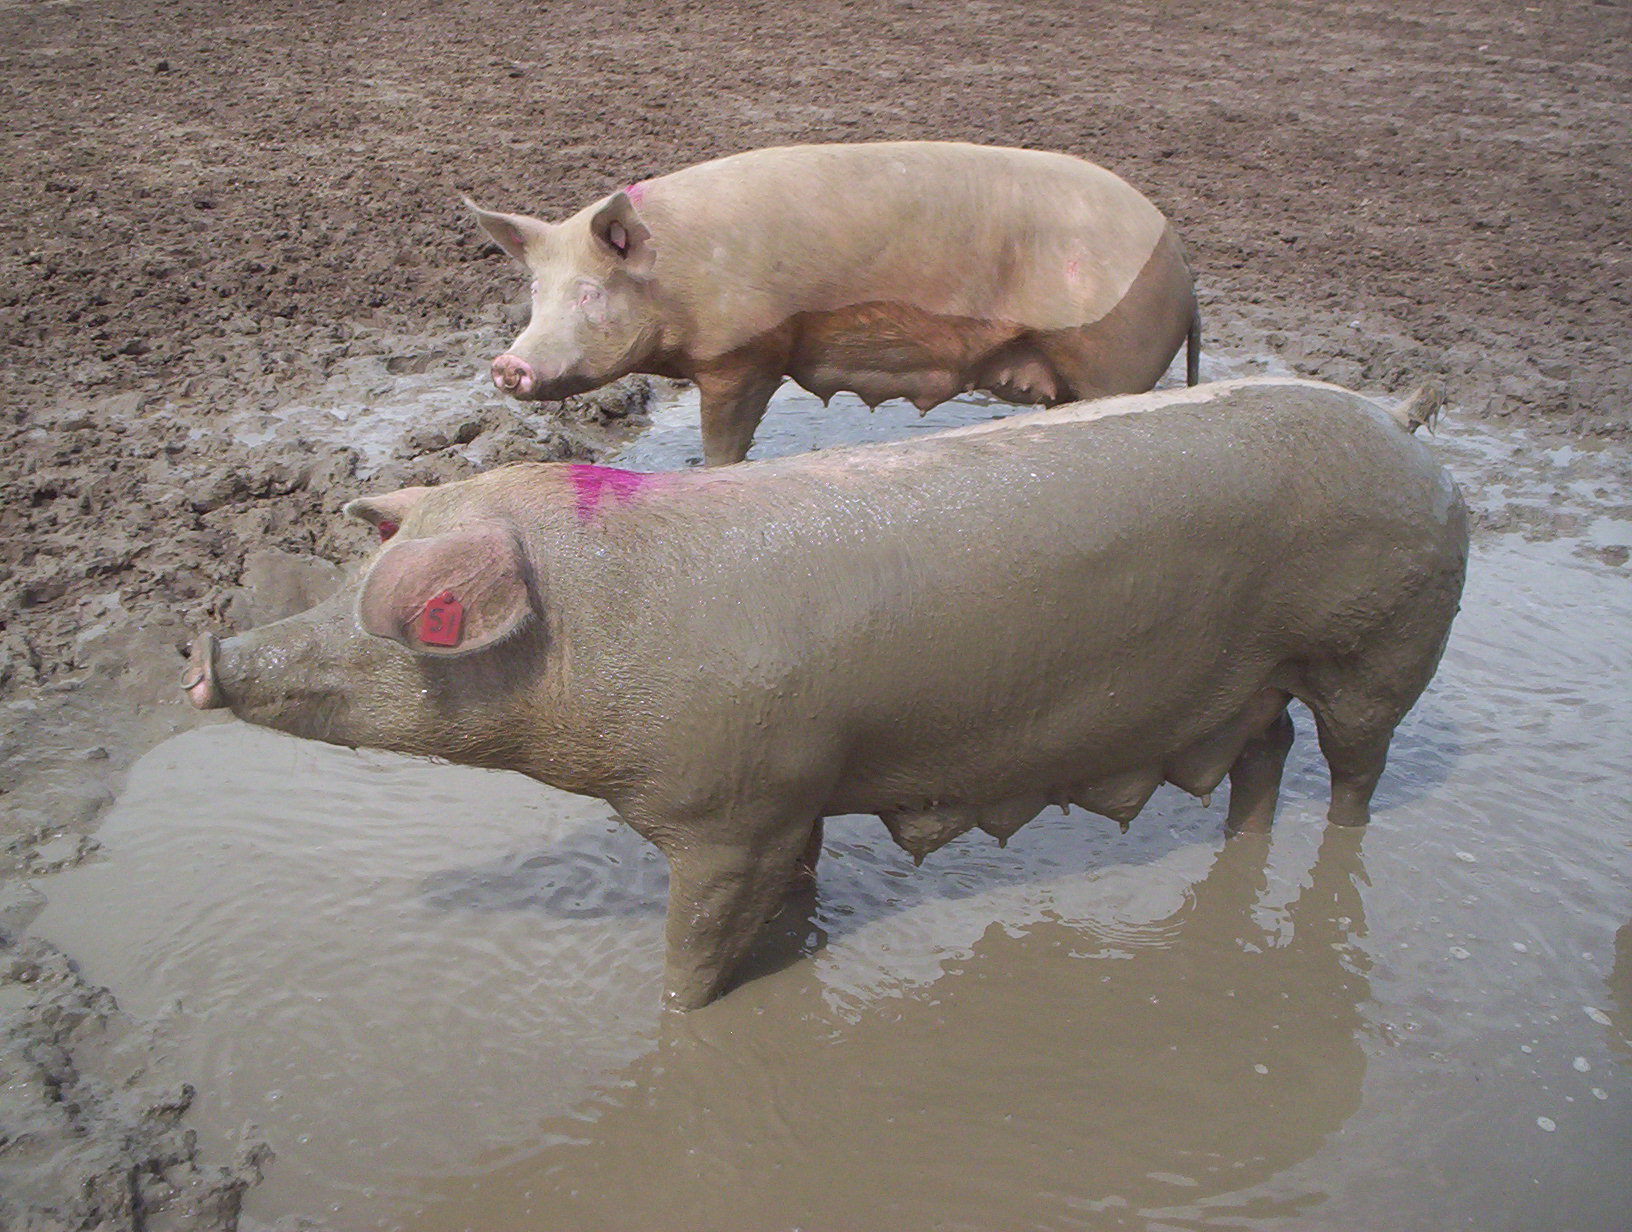 Two pigs in a wallow